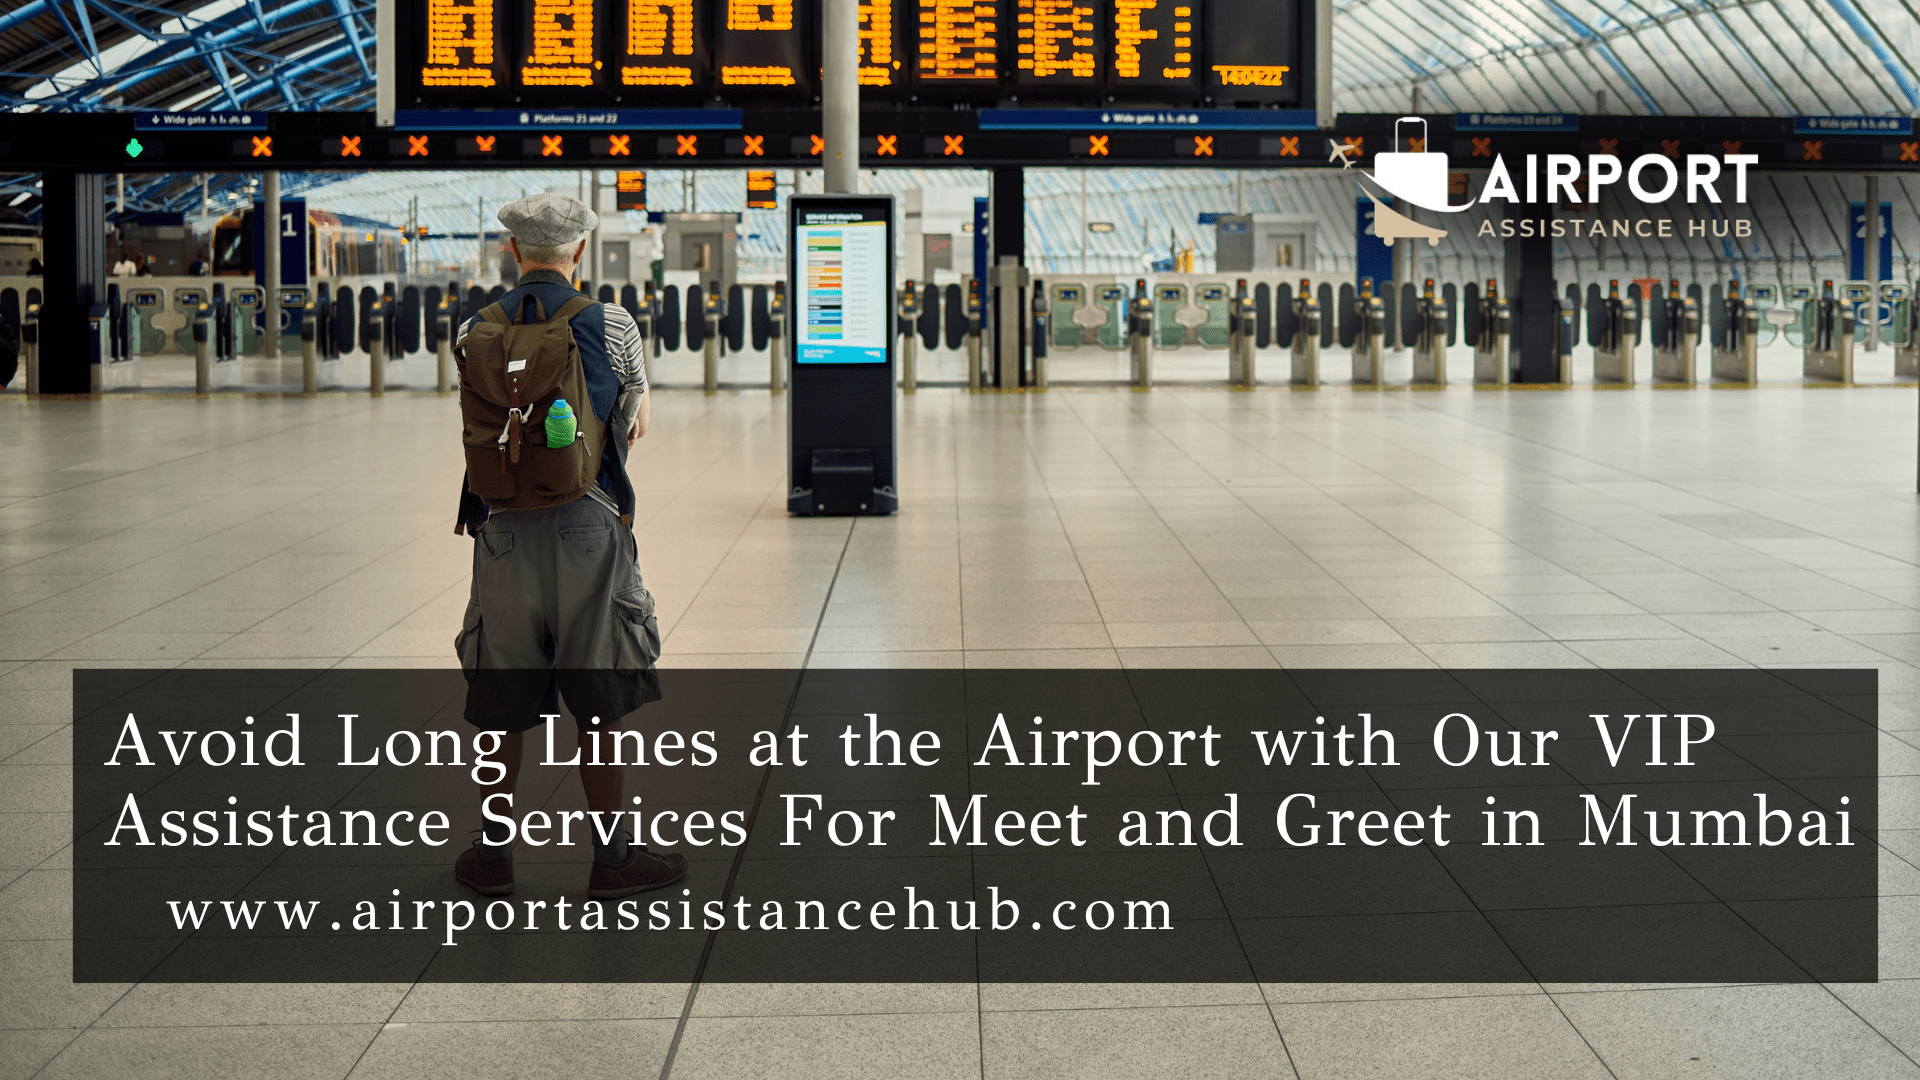 Avoid Long Lines at the Airport with Our VIP Assistance Services For Meet and Greet in Mumbai